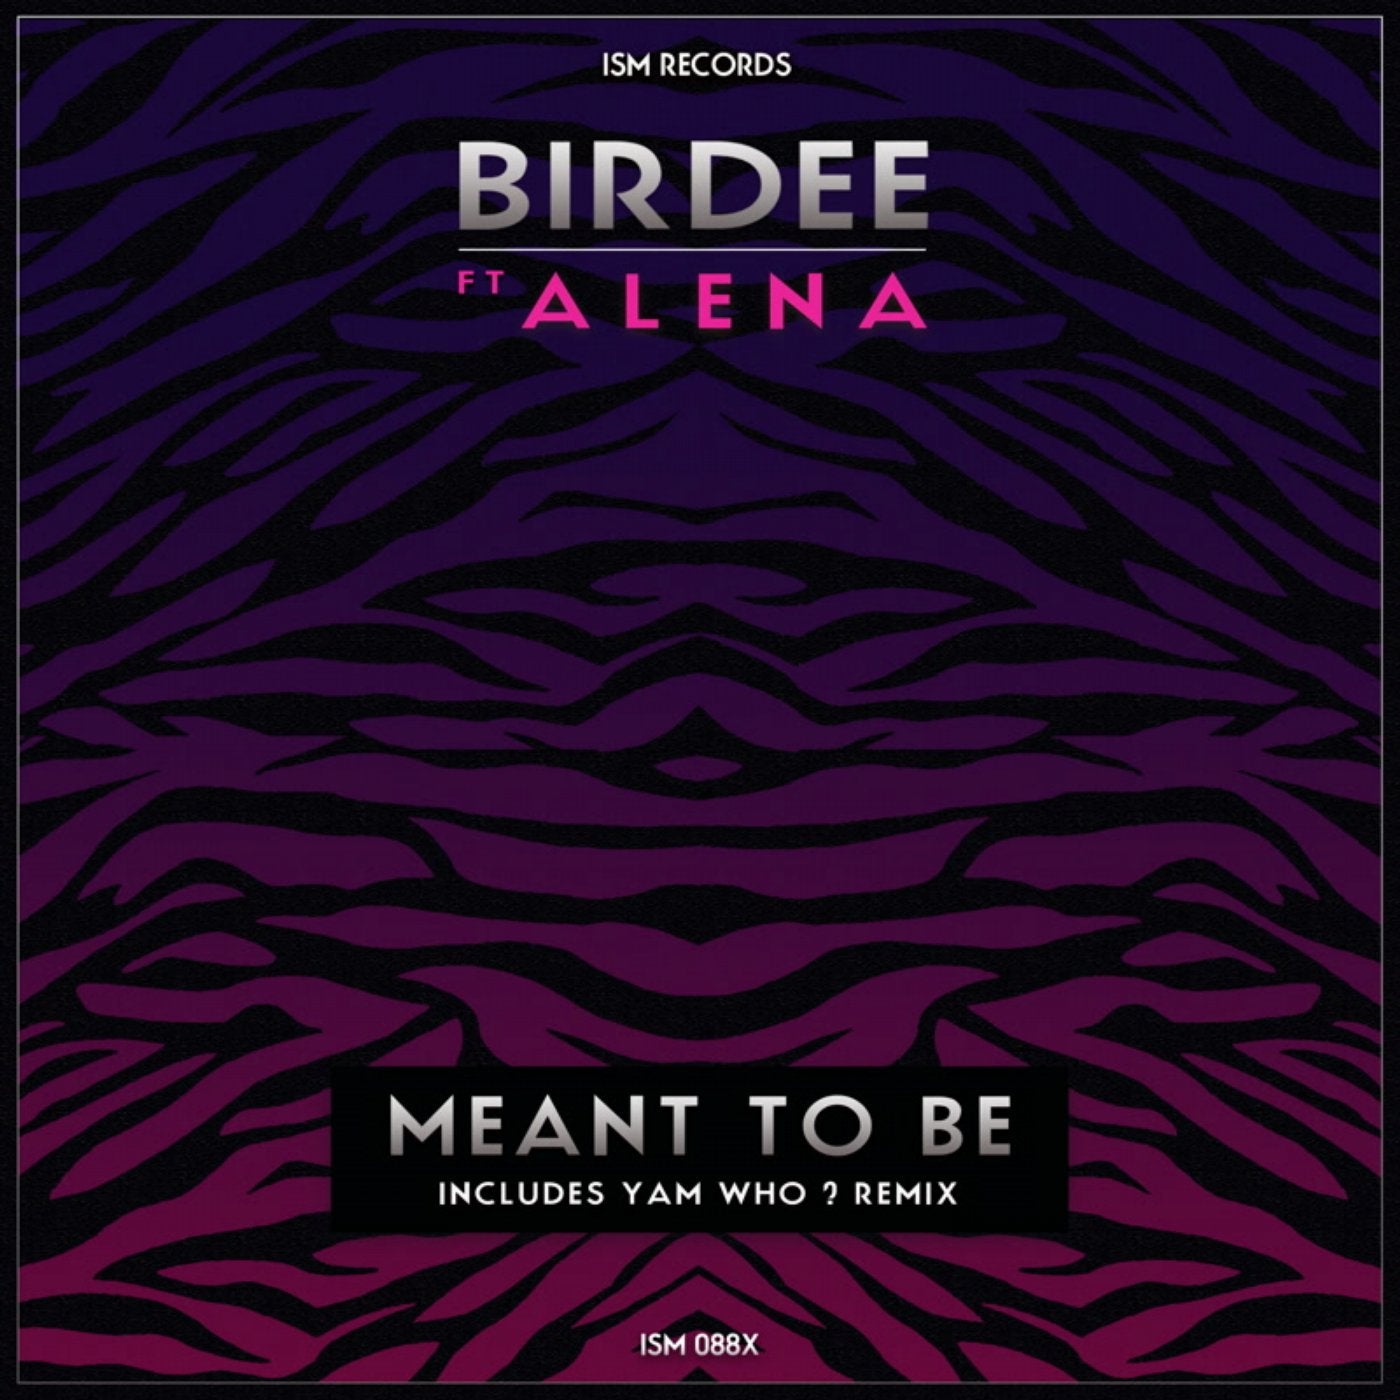 Meant to Be (feat. Alena)